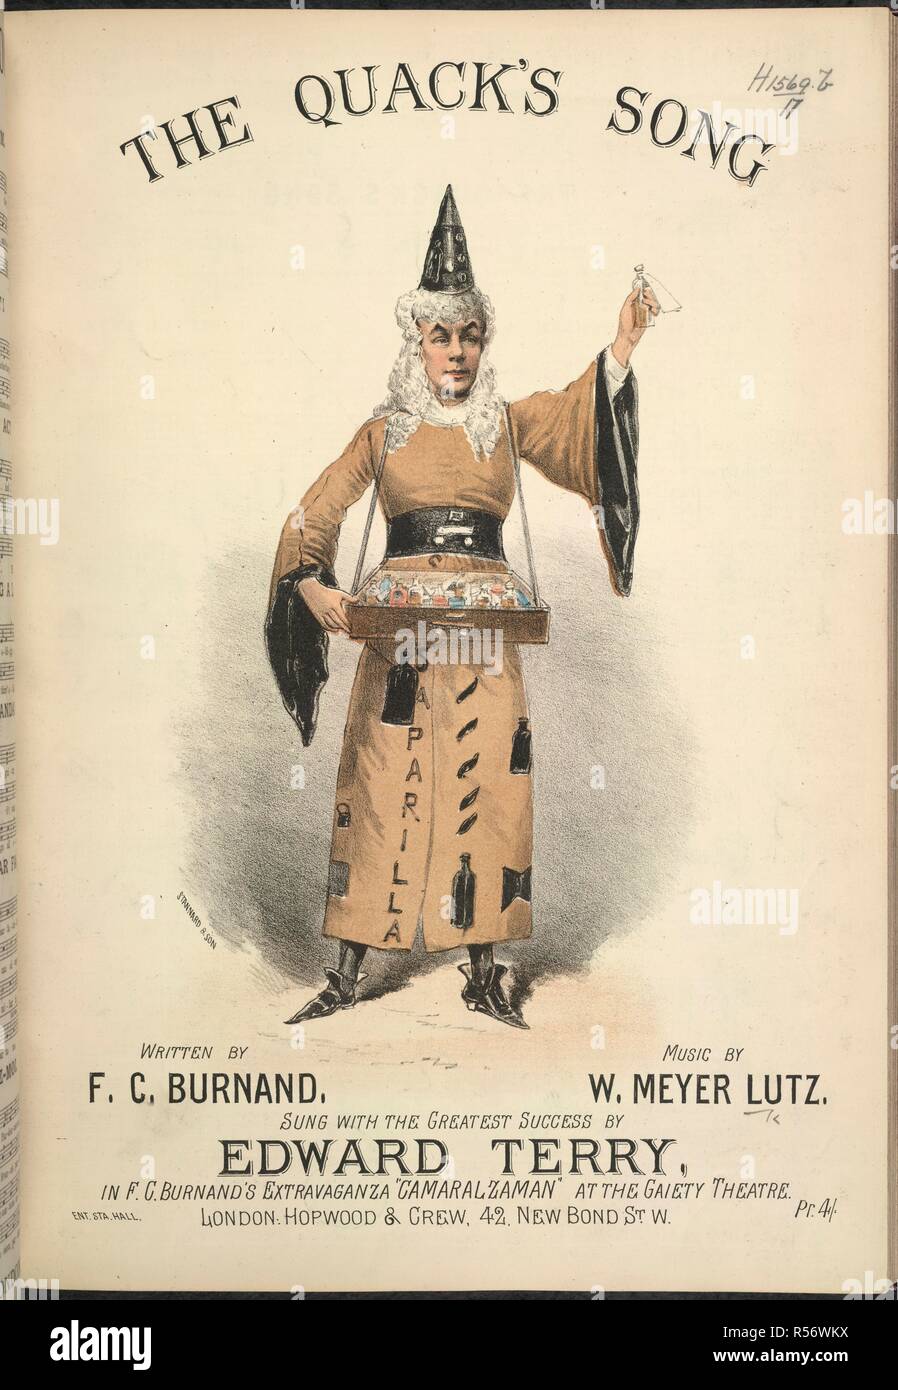 The Quack's song. A male figure wearing a conical hat and costume. The Quack's Song. Written by F. C. Burnand, etc. Sung with the greatest success by Edward Terry in F.G. Burnand's extravanganza 'Camaralzaman' at the Gaity Threatre, Music by W. Meyer Lutz. London : Hopwood & Crew, [1887]. Source: h.1569.b.17,. Language: English. Author: Lutz, Wilhelm Meyer. Stock Photo